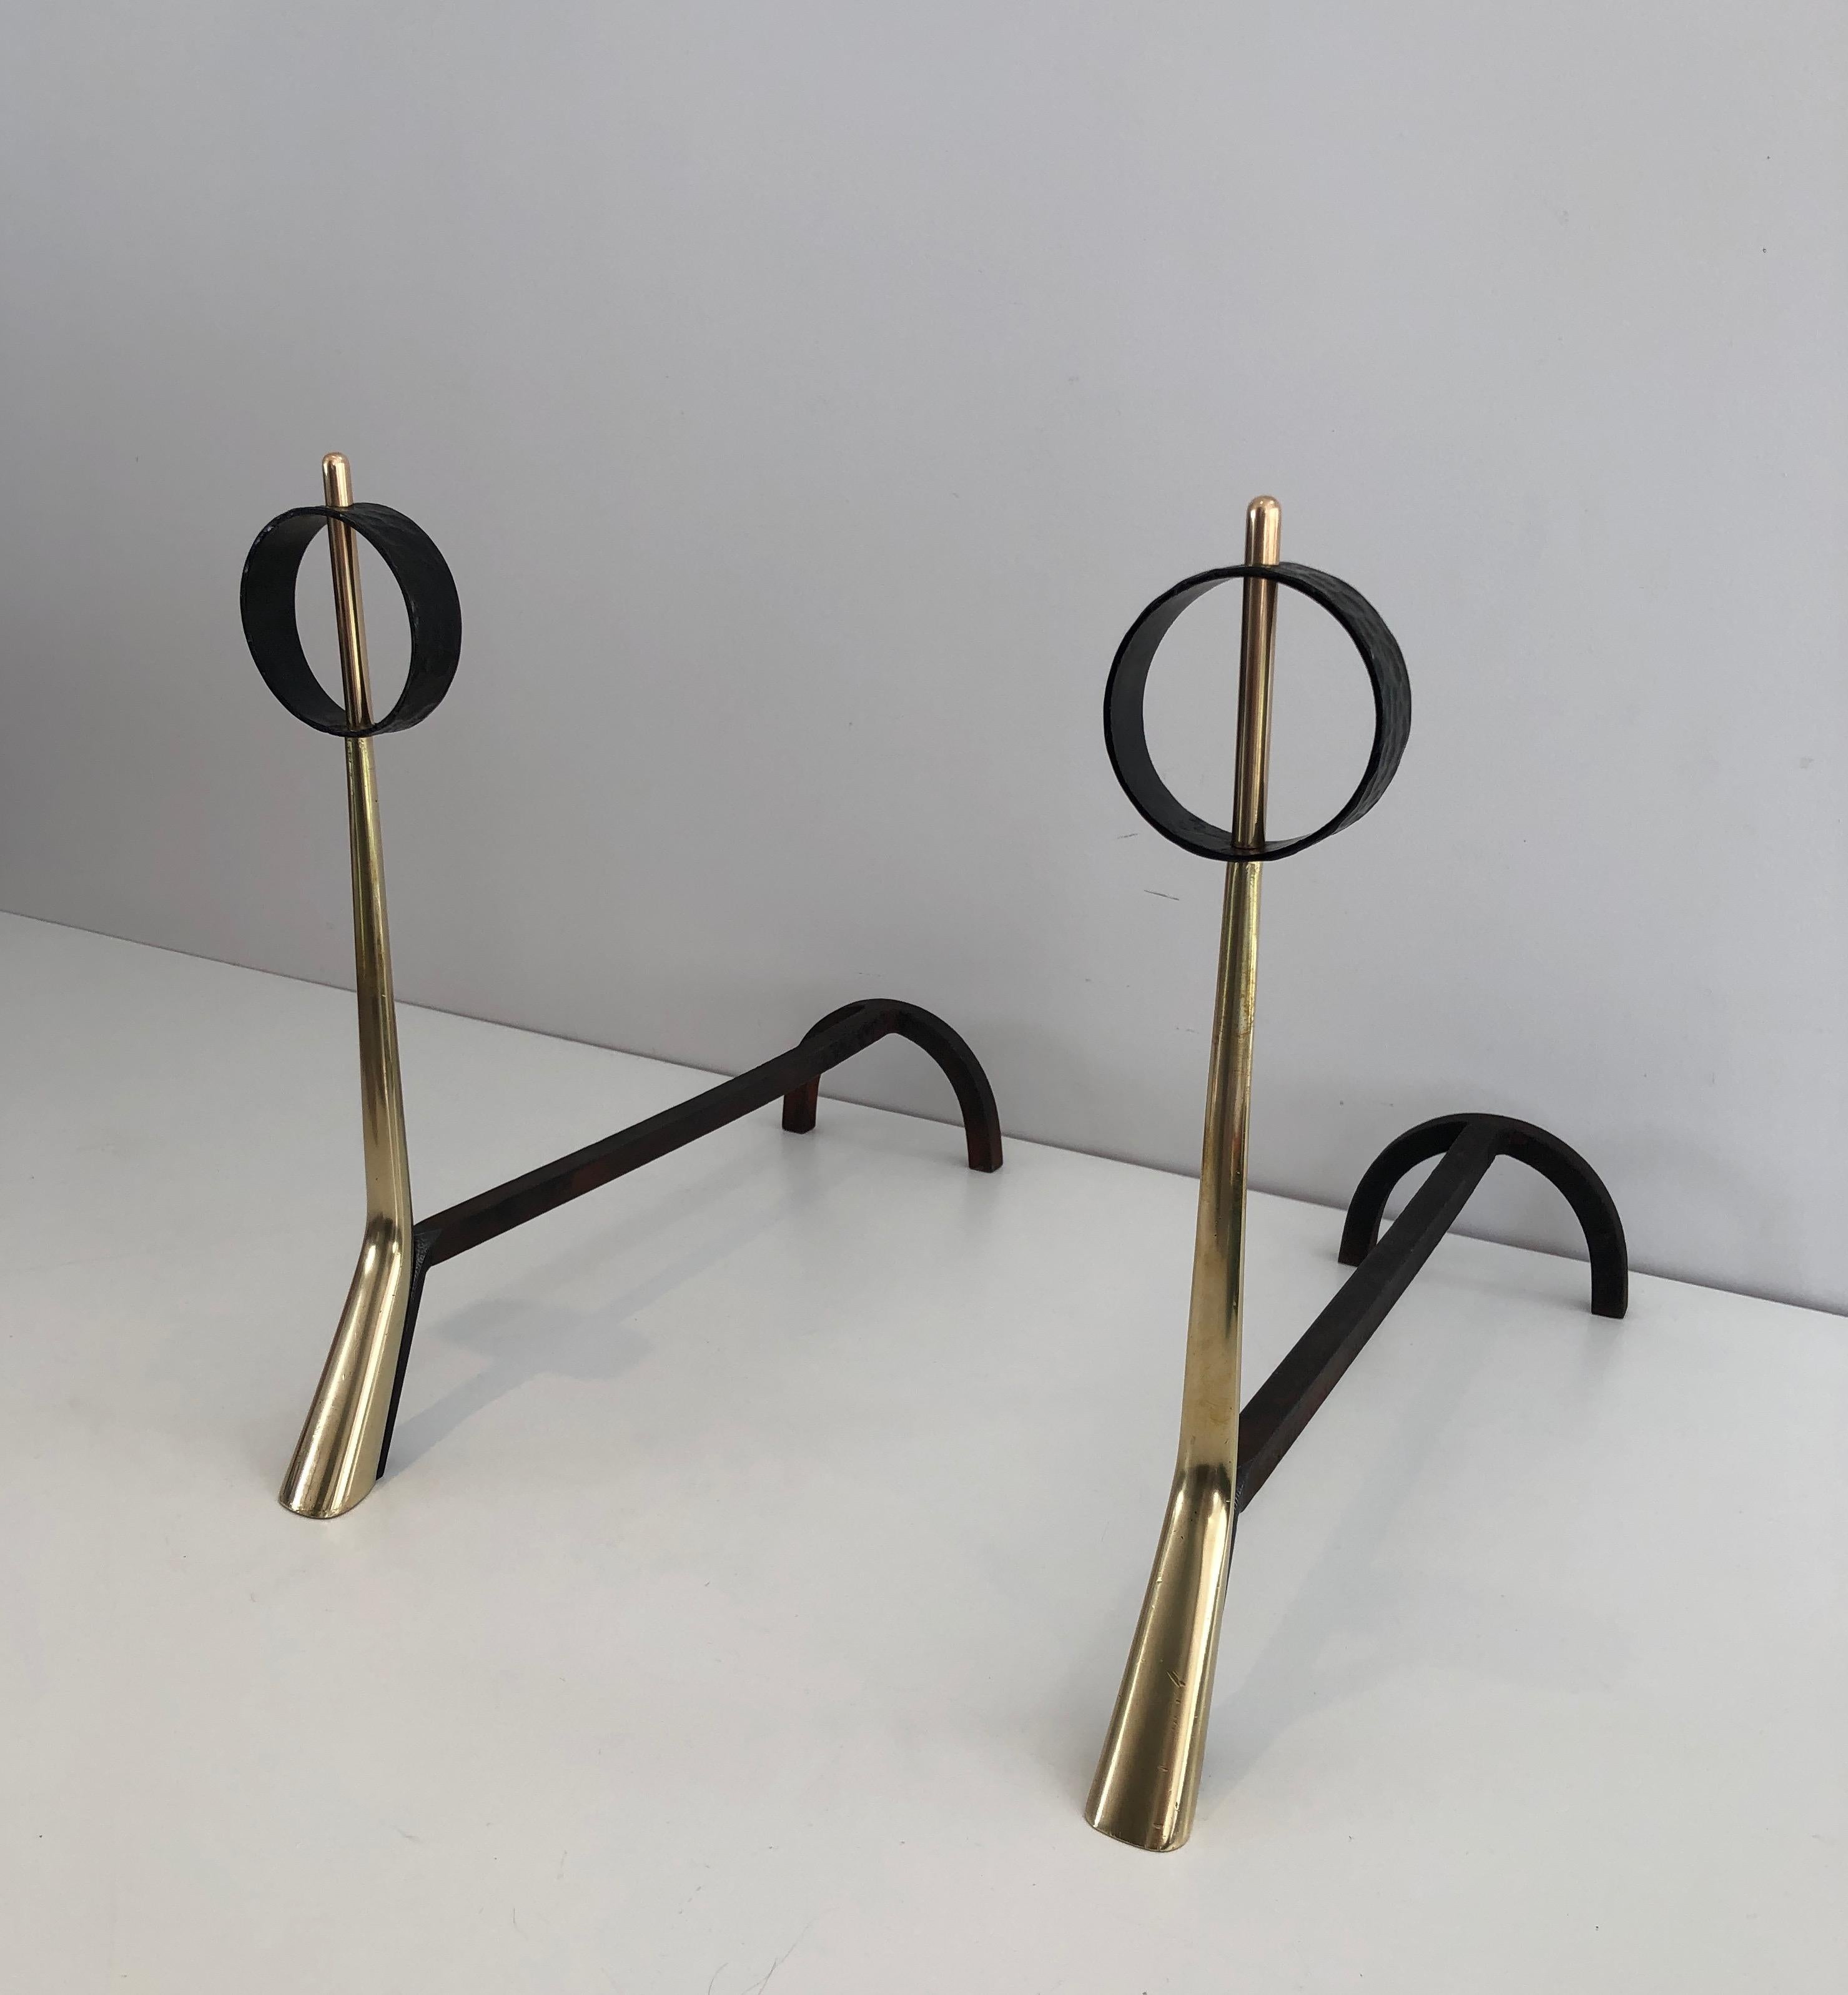 Pair of Modernist Bronze and Wrought Iron Andirons, Italian, circa 1950 For Sale 14